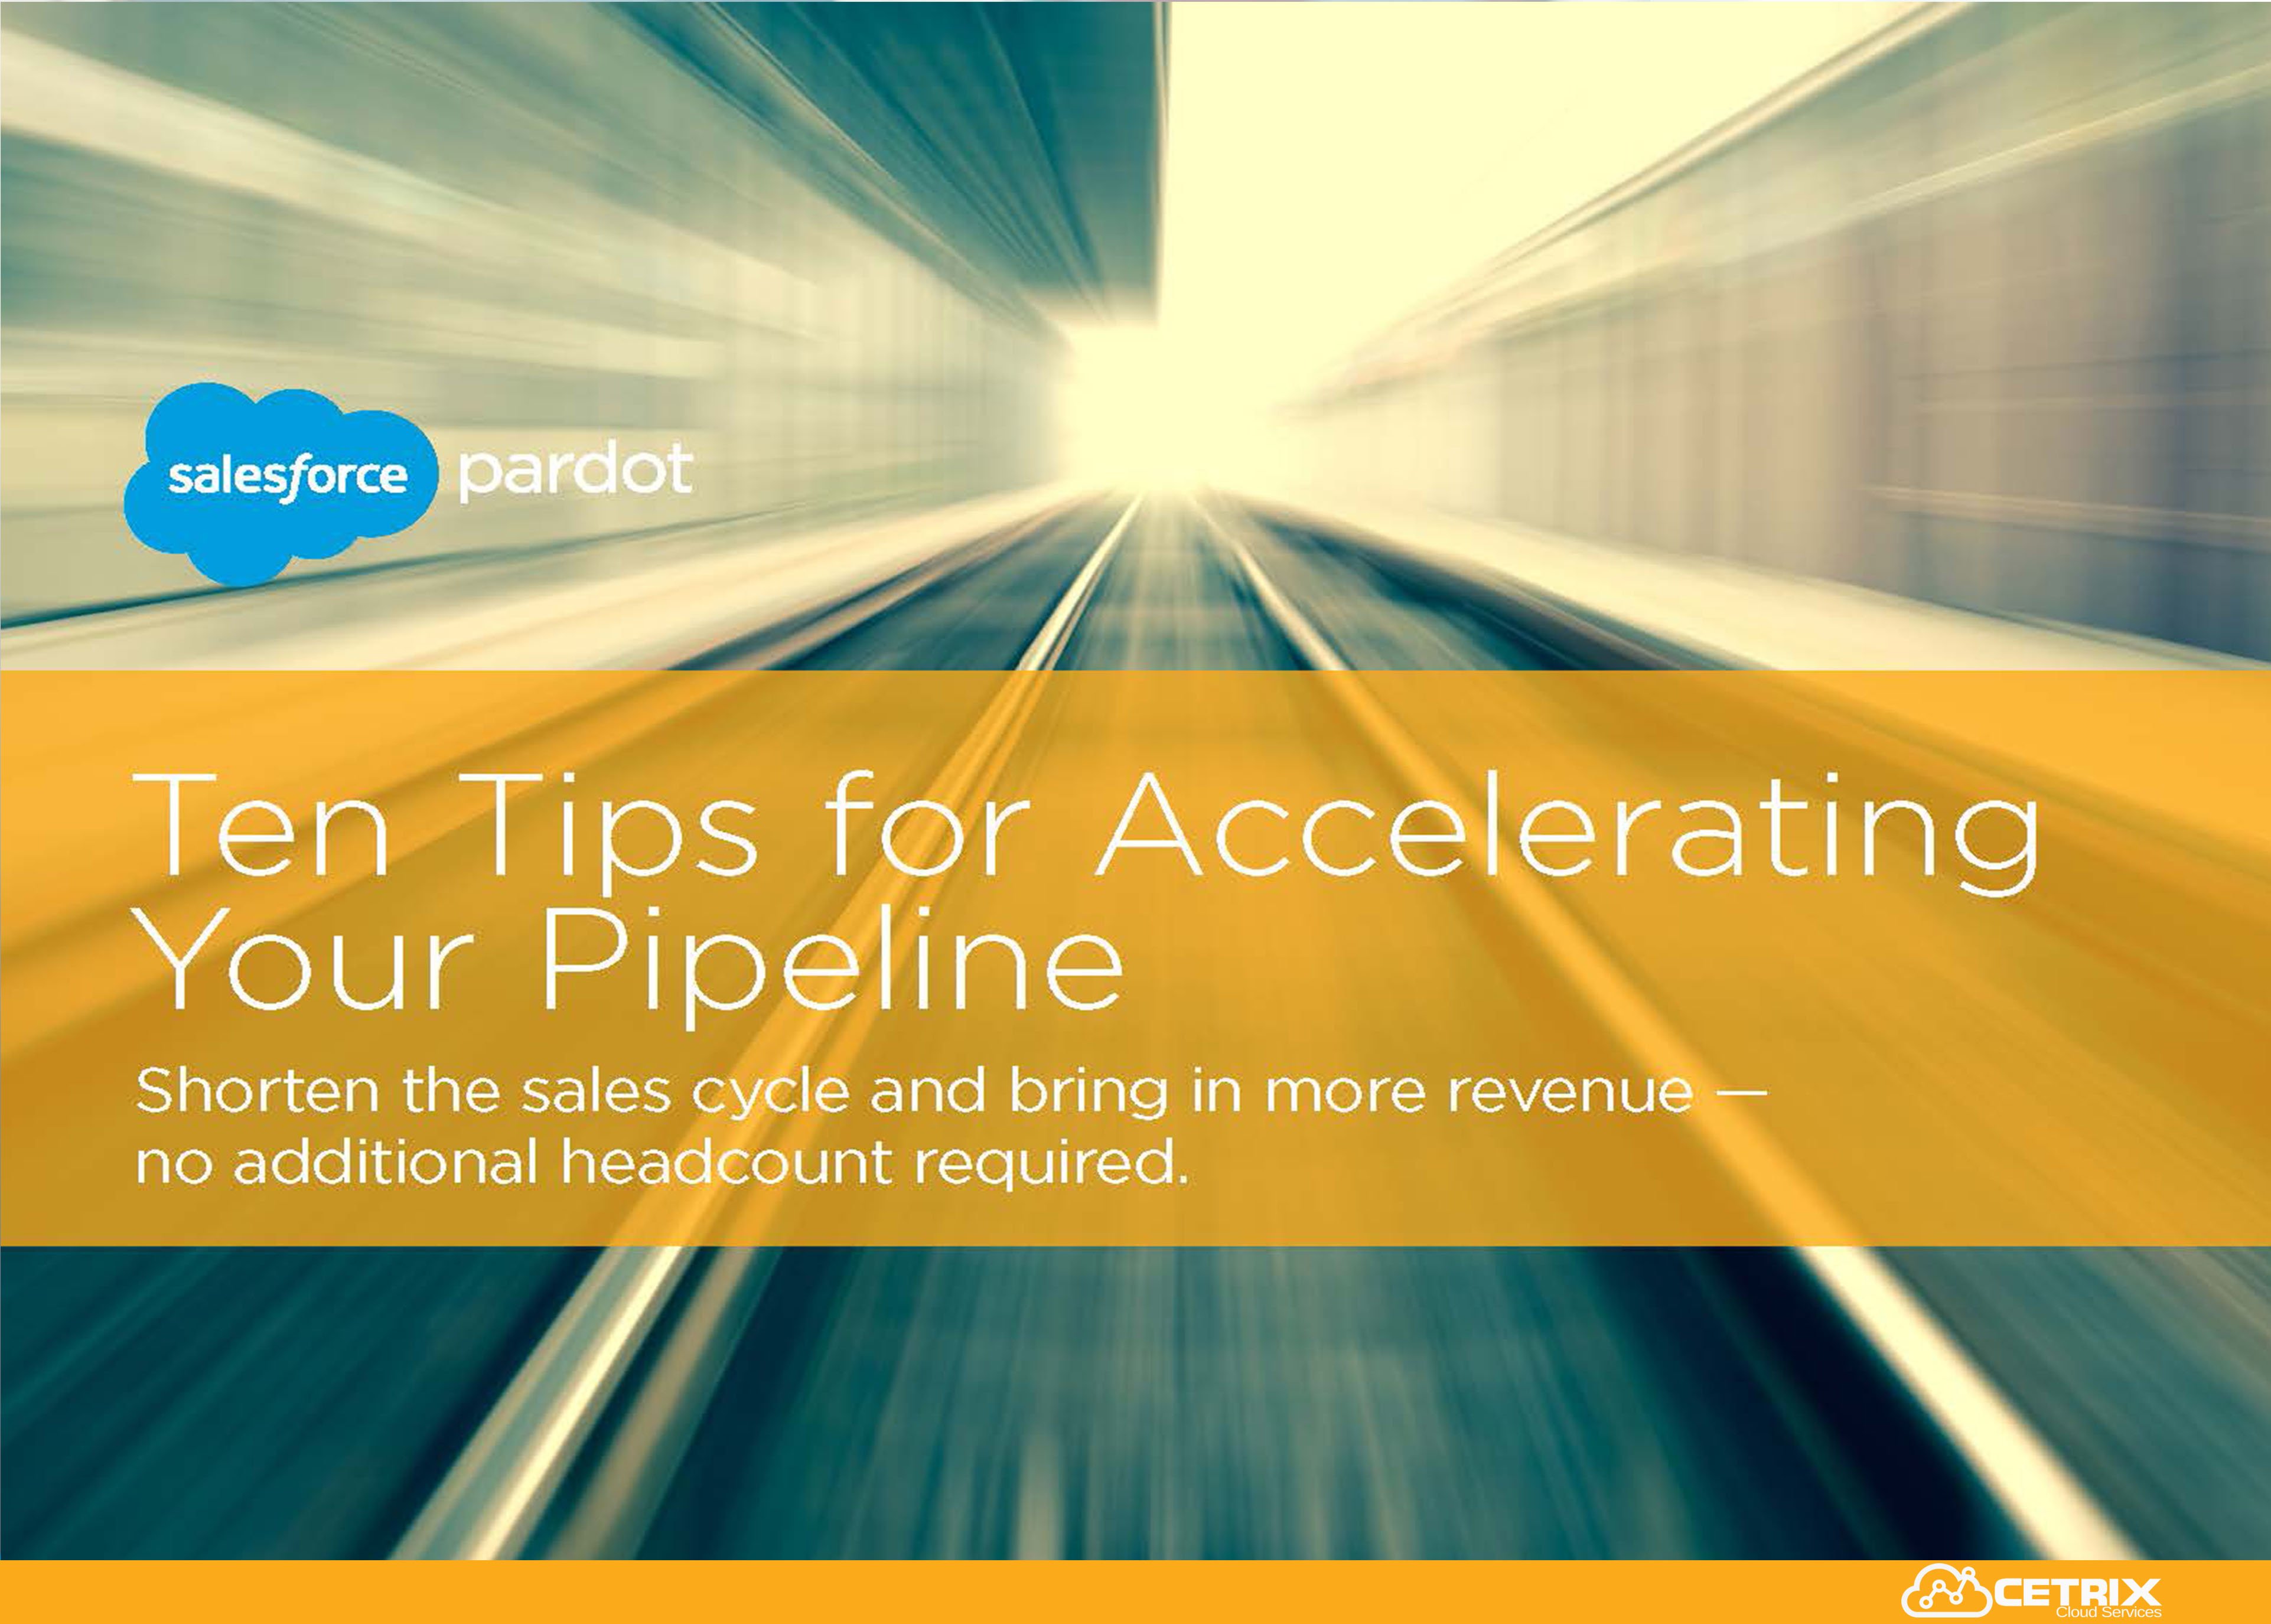 Ten Tips for Accelerating Your Pipeline by Pardot